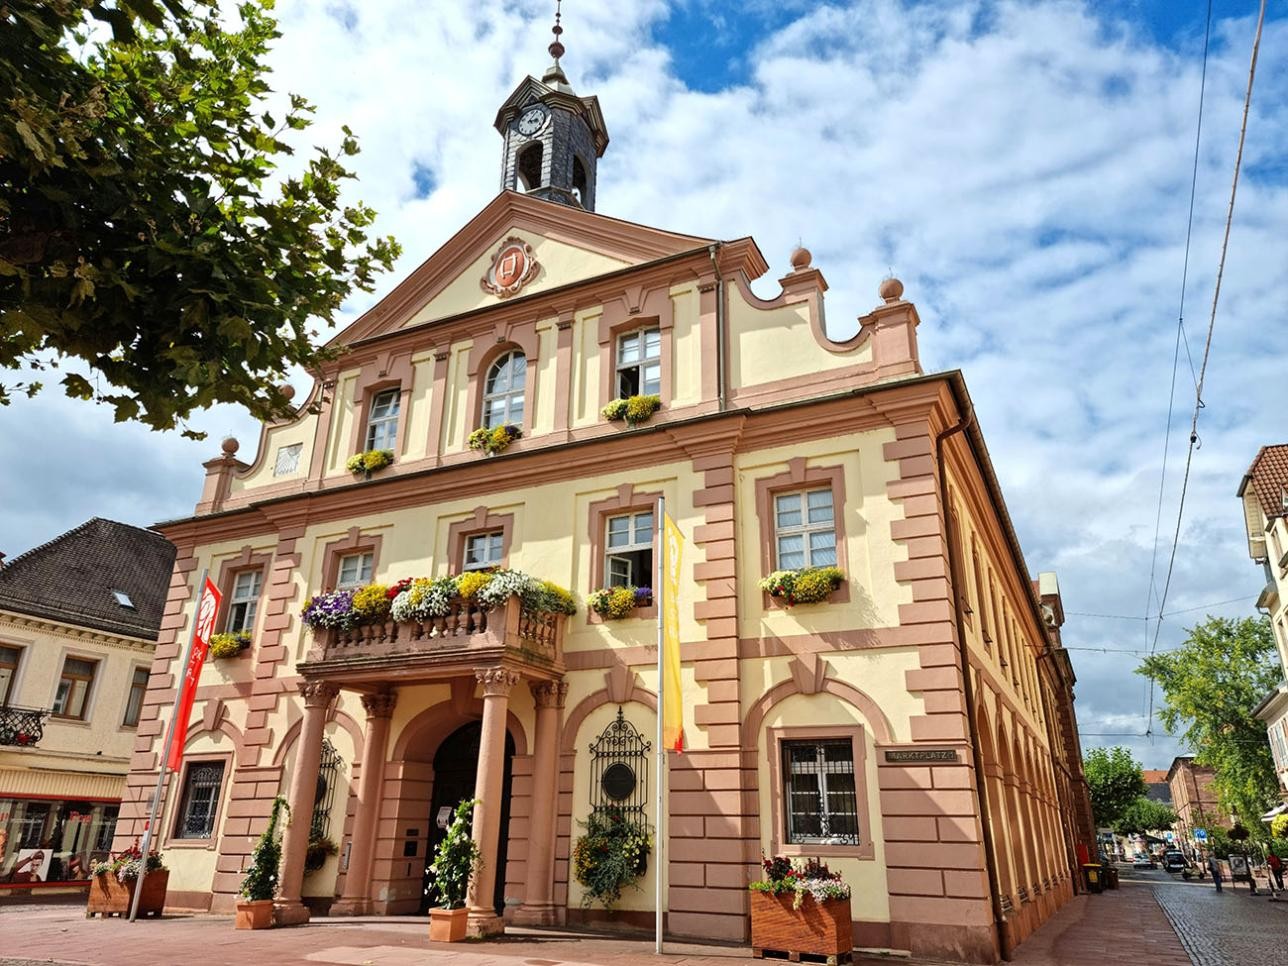 Exterior view of the historic town hall in Rastatt